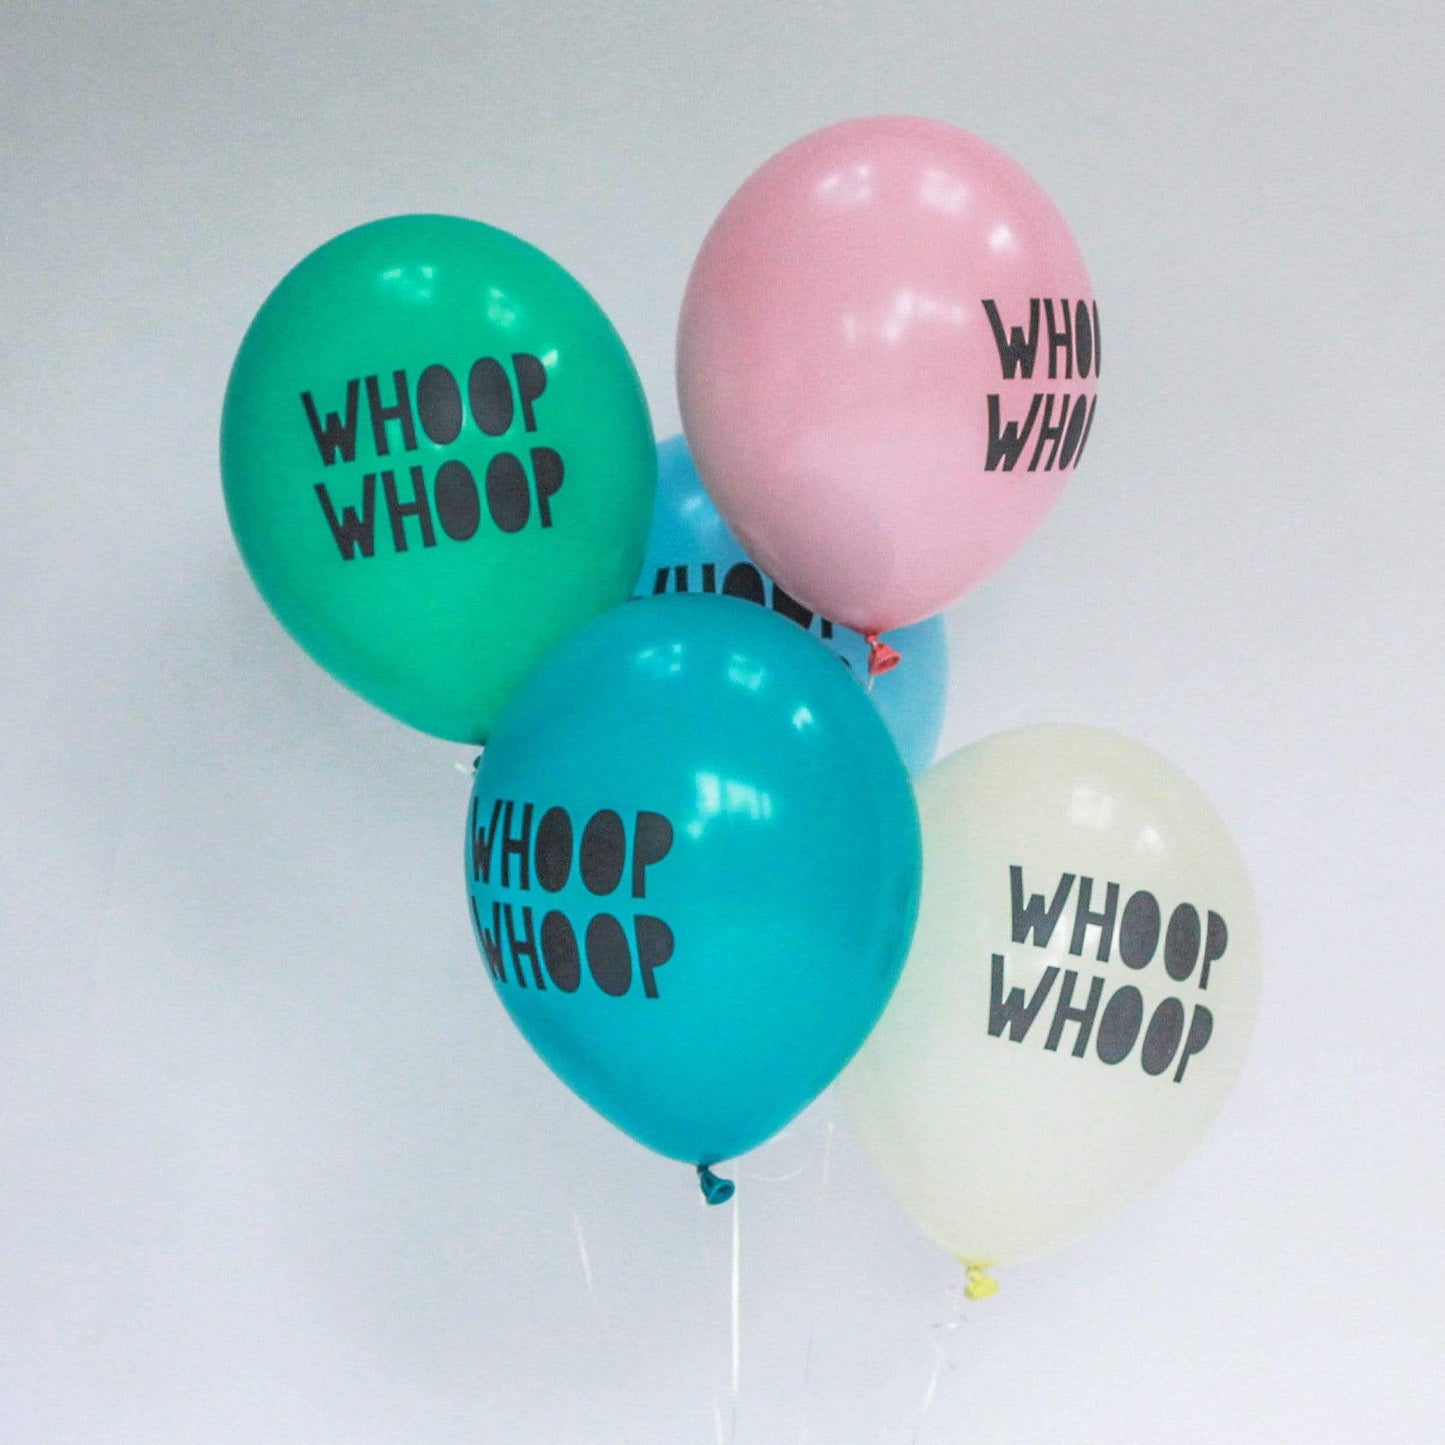 Whoop Whoop Balloons Pink | Modern Party Balloons | Online Balloonery Pretty Little Party Shop